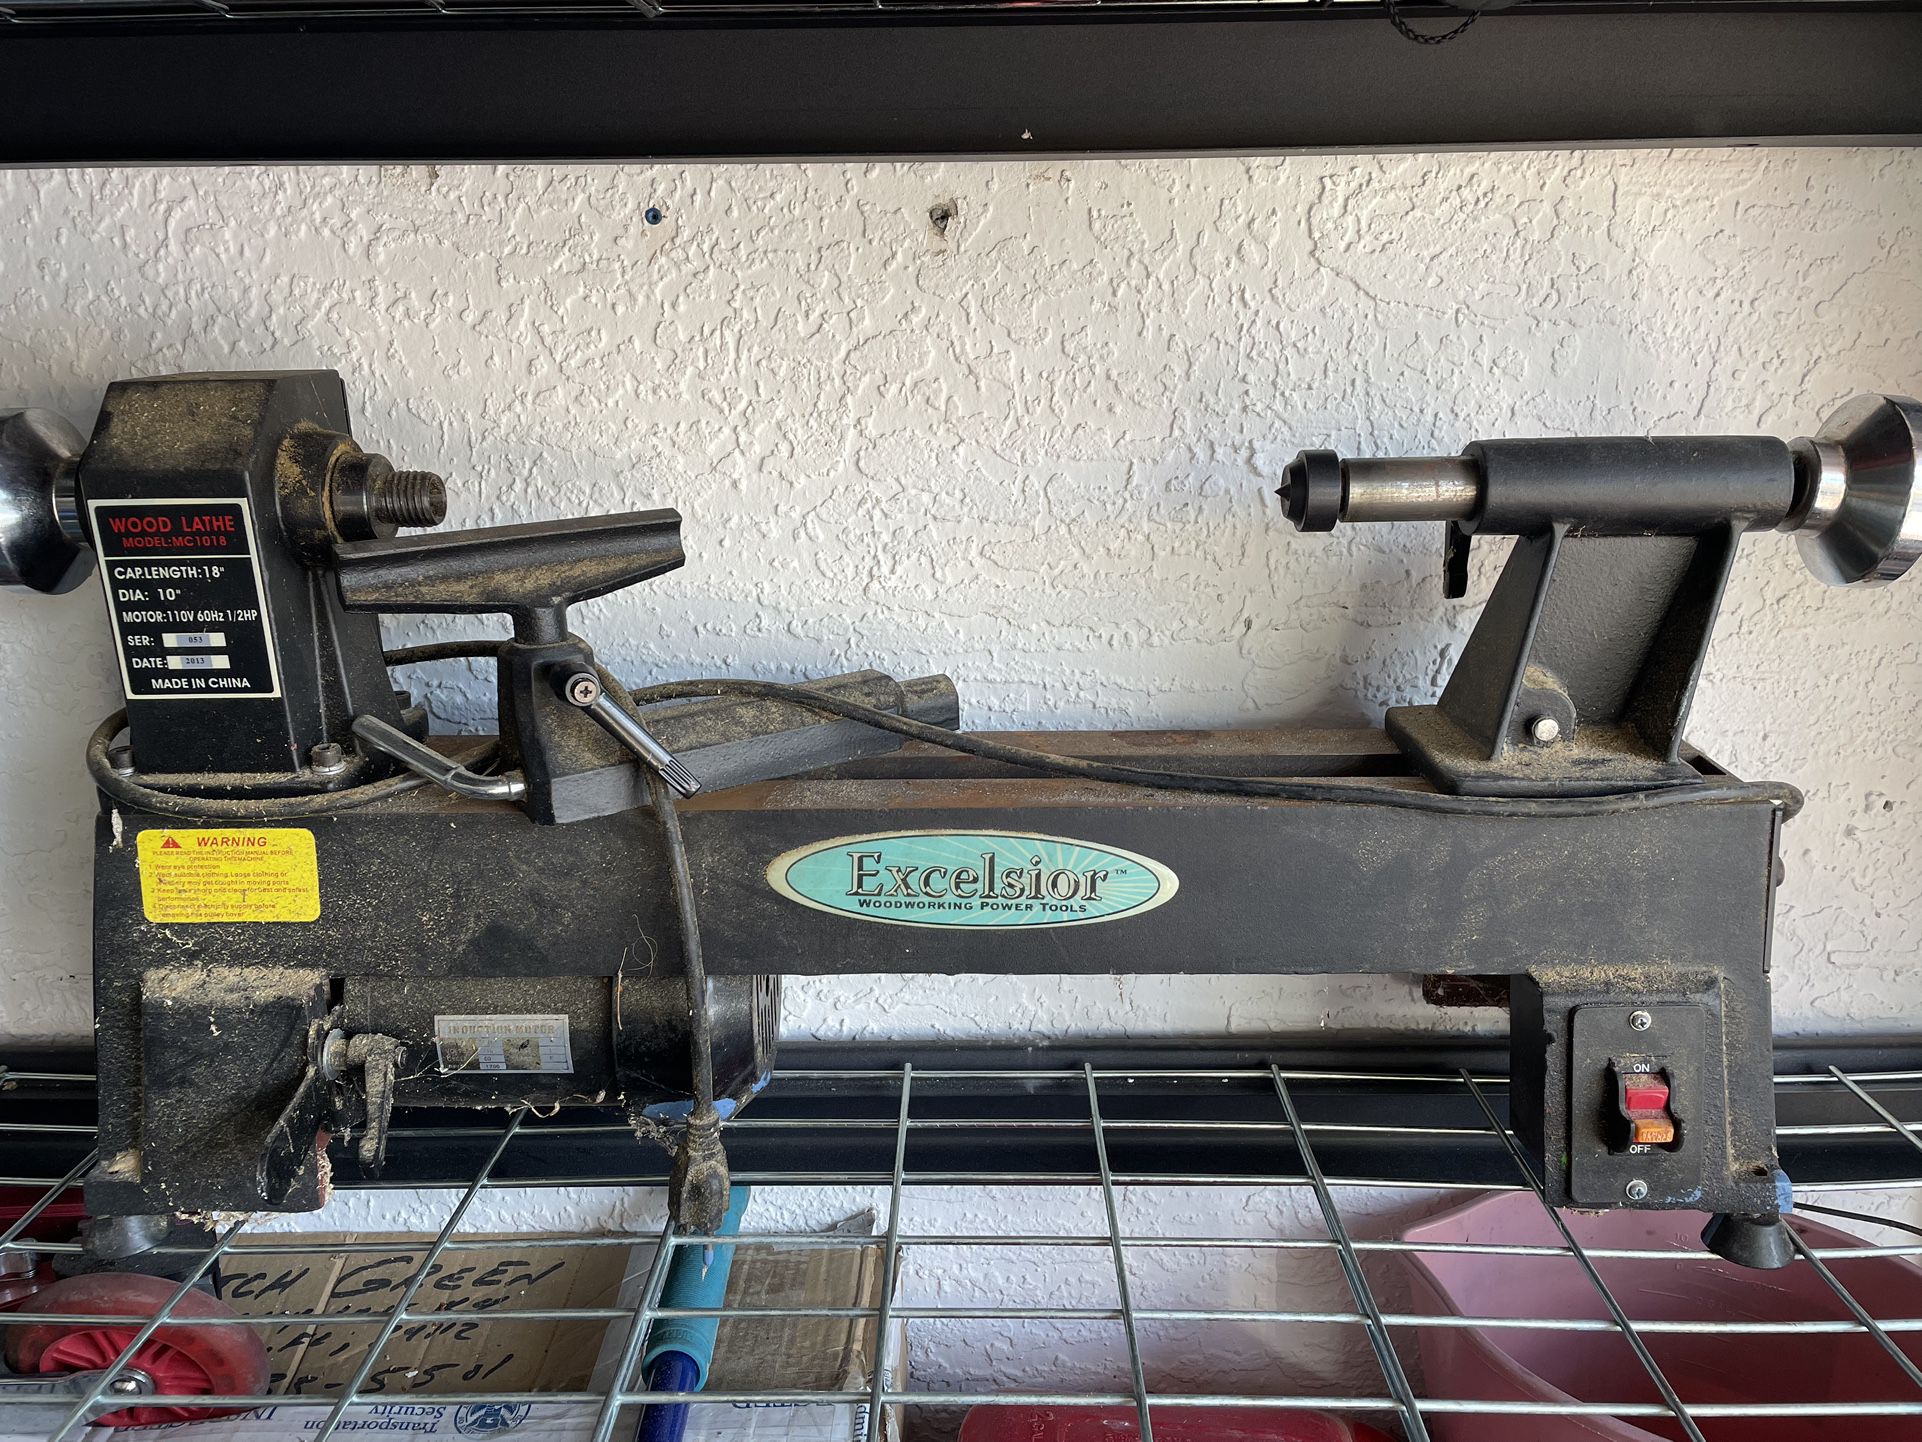 Excelsior, woodworking power tool